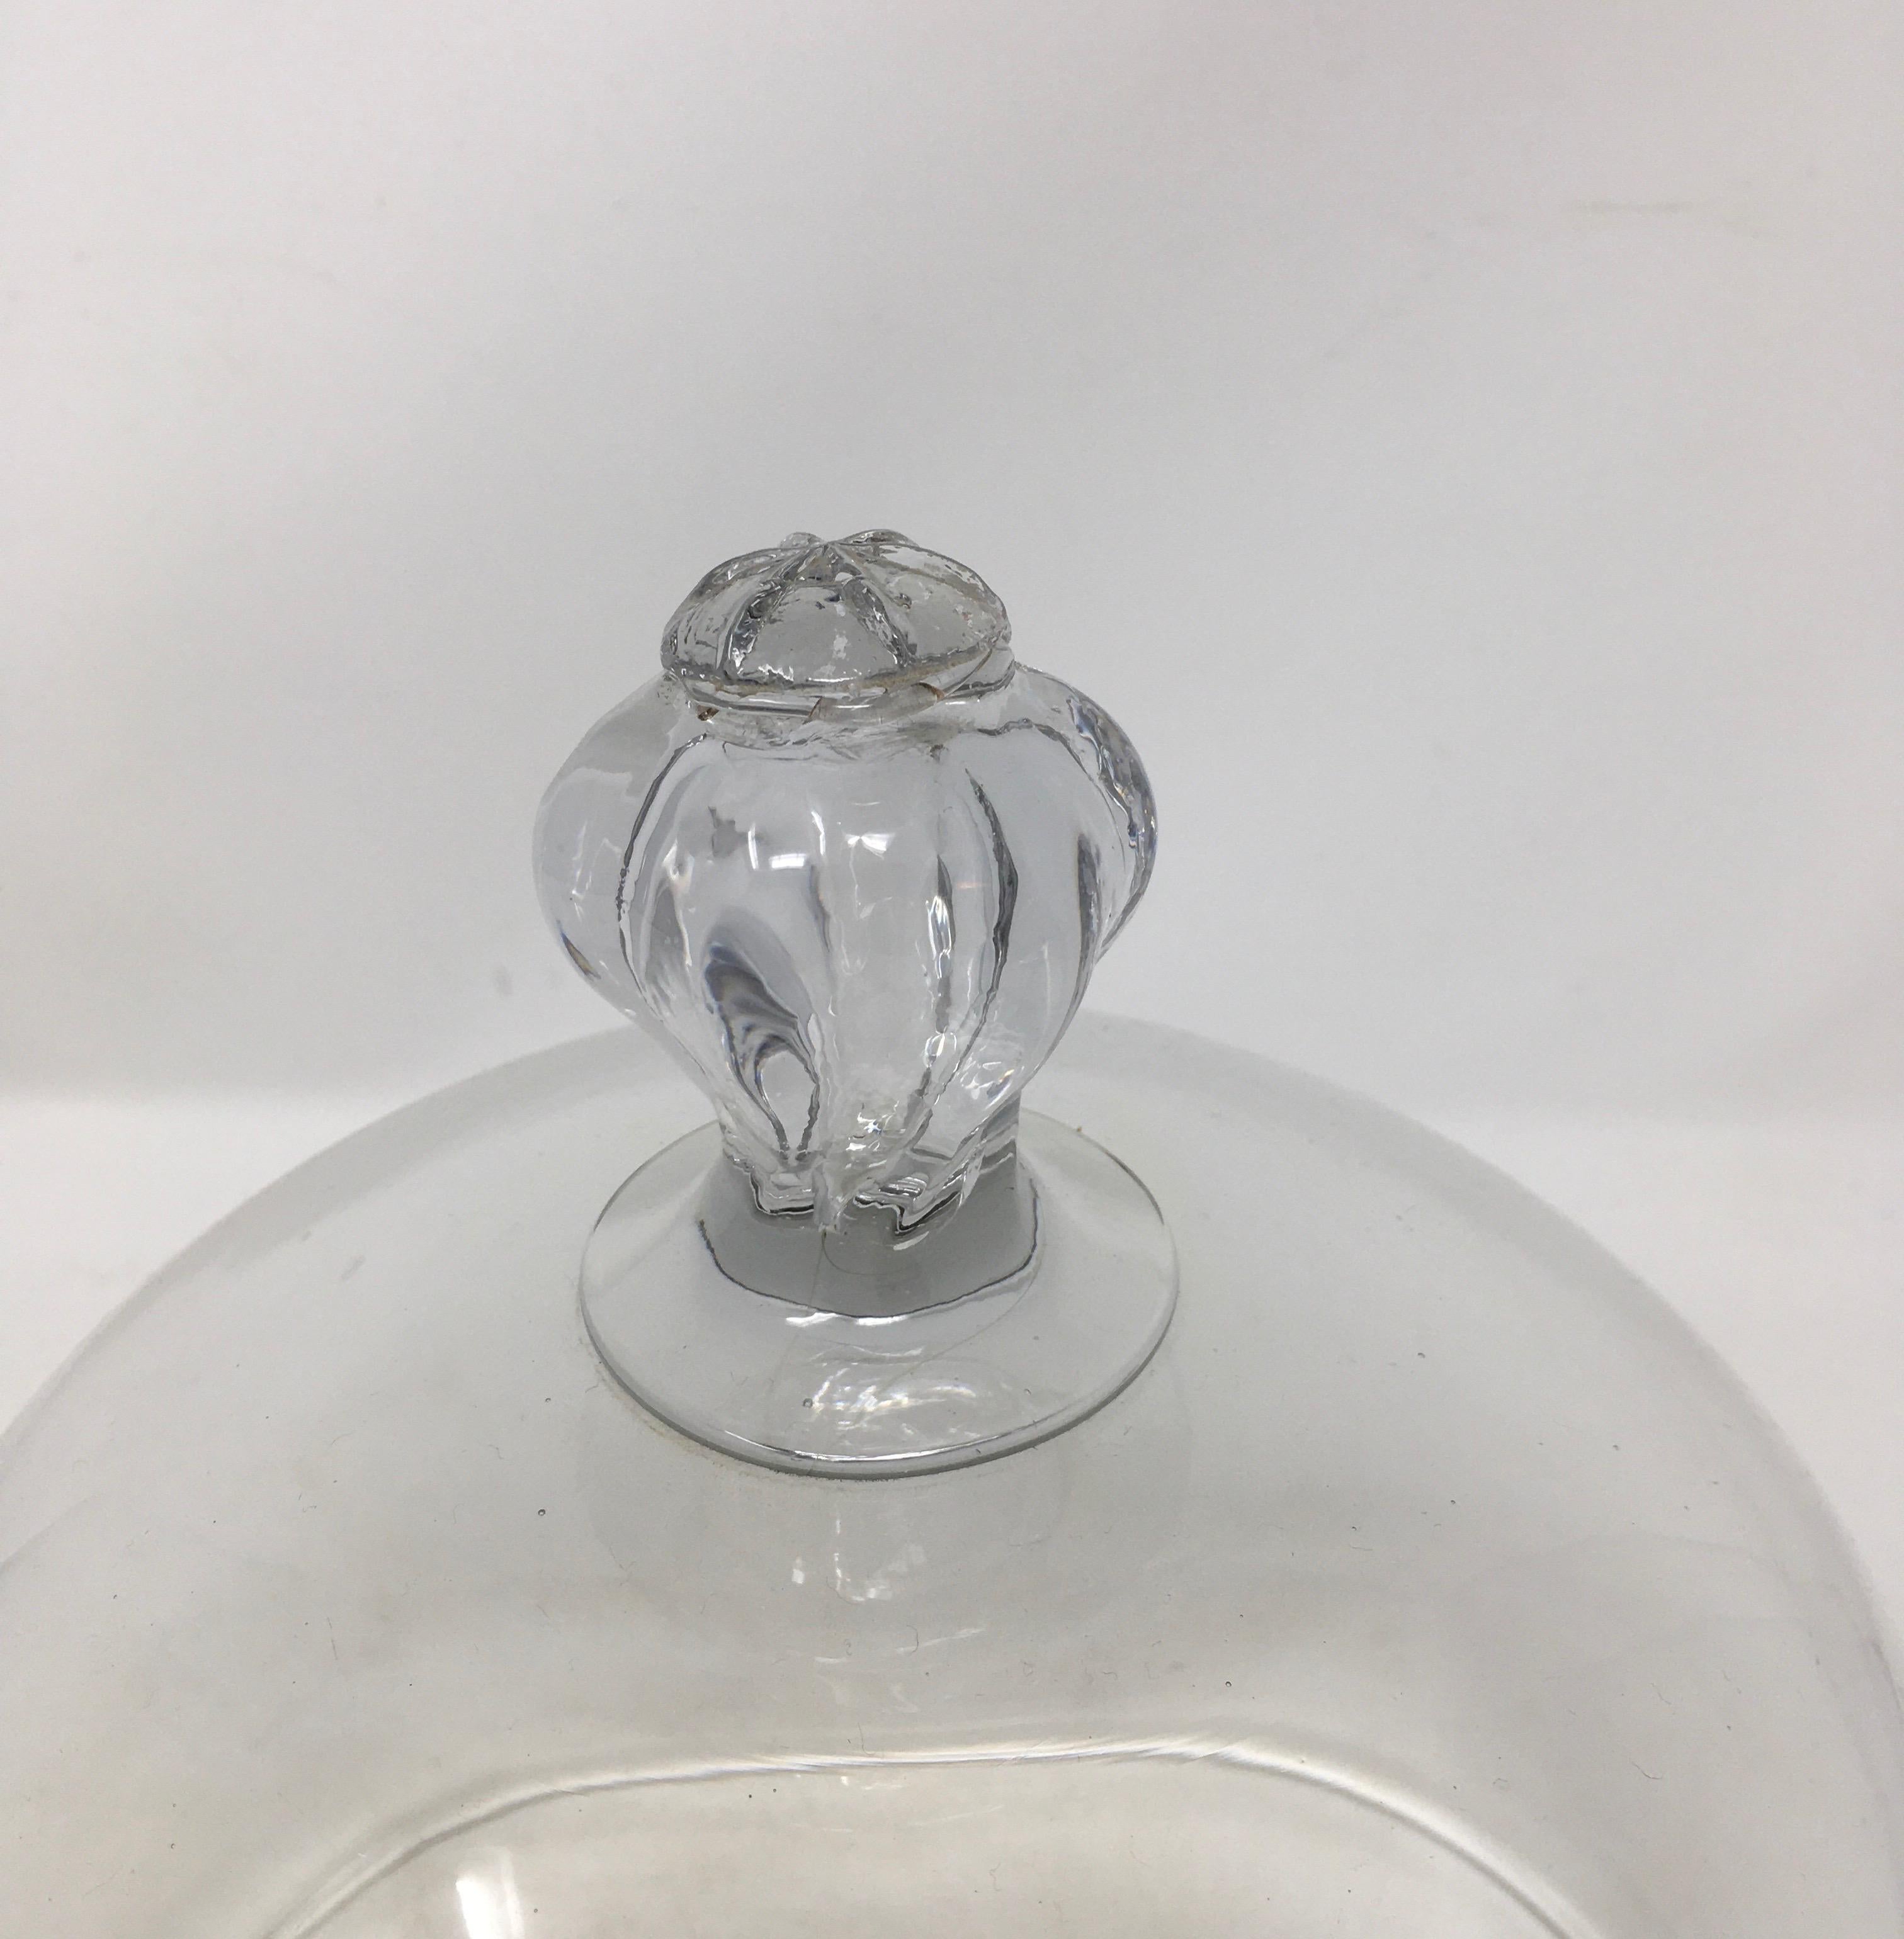 French antique glass dome cloche with a solid glass knob handle. Smooth and polished glass, these were used in French cheese shop's and patisseries to cover and display cheeses and baked goods.



This piece weighs 3 lbs.